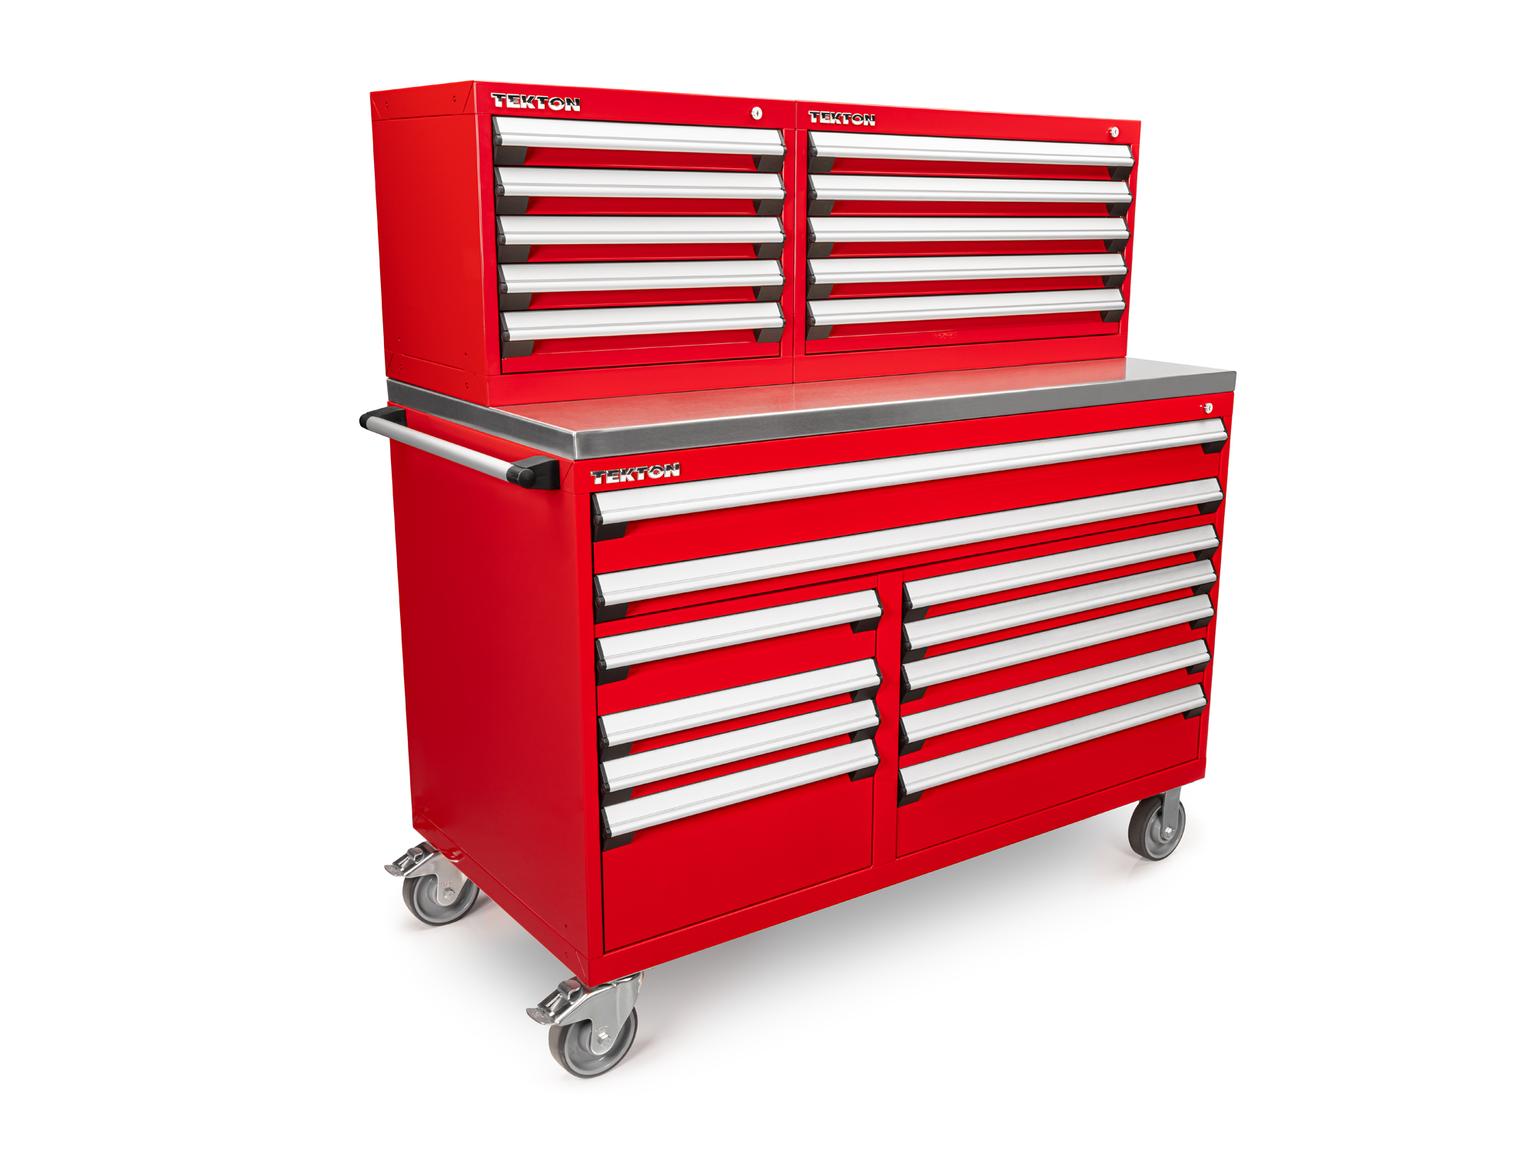 21-Drawer 40/60 Split Bank Tool Cabinet System with Stainless Steel Top, Red (60 W x 30 D x 63 H in.)